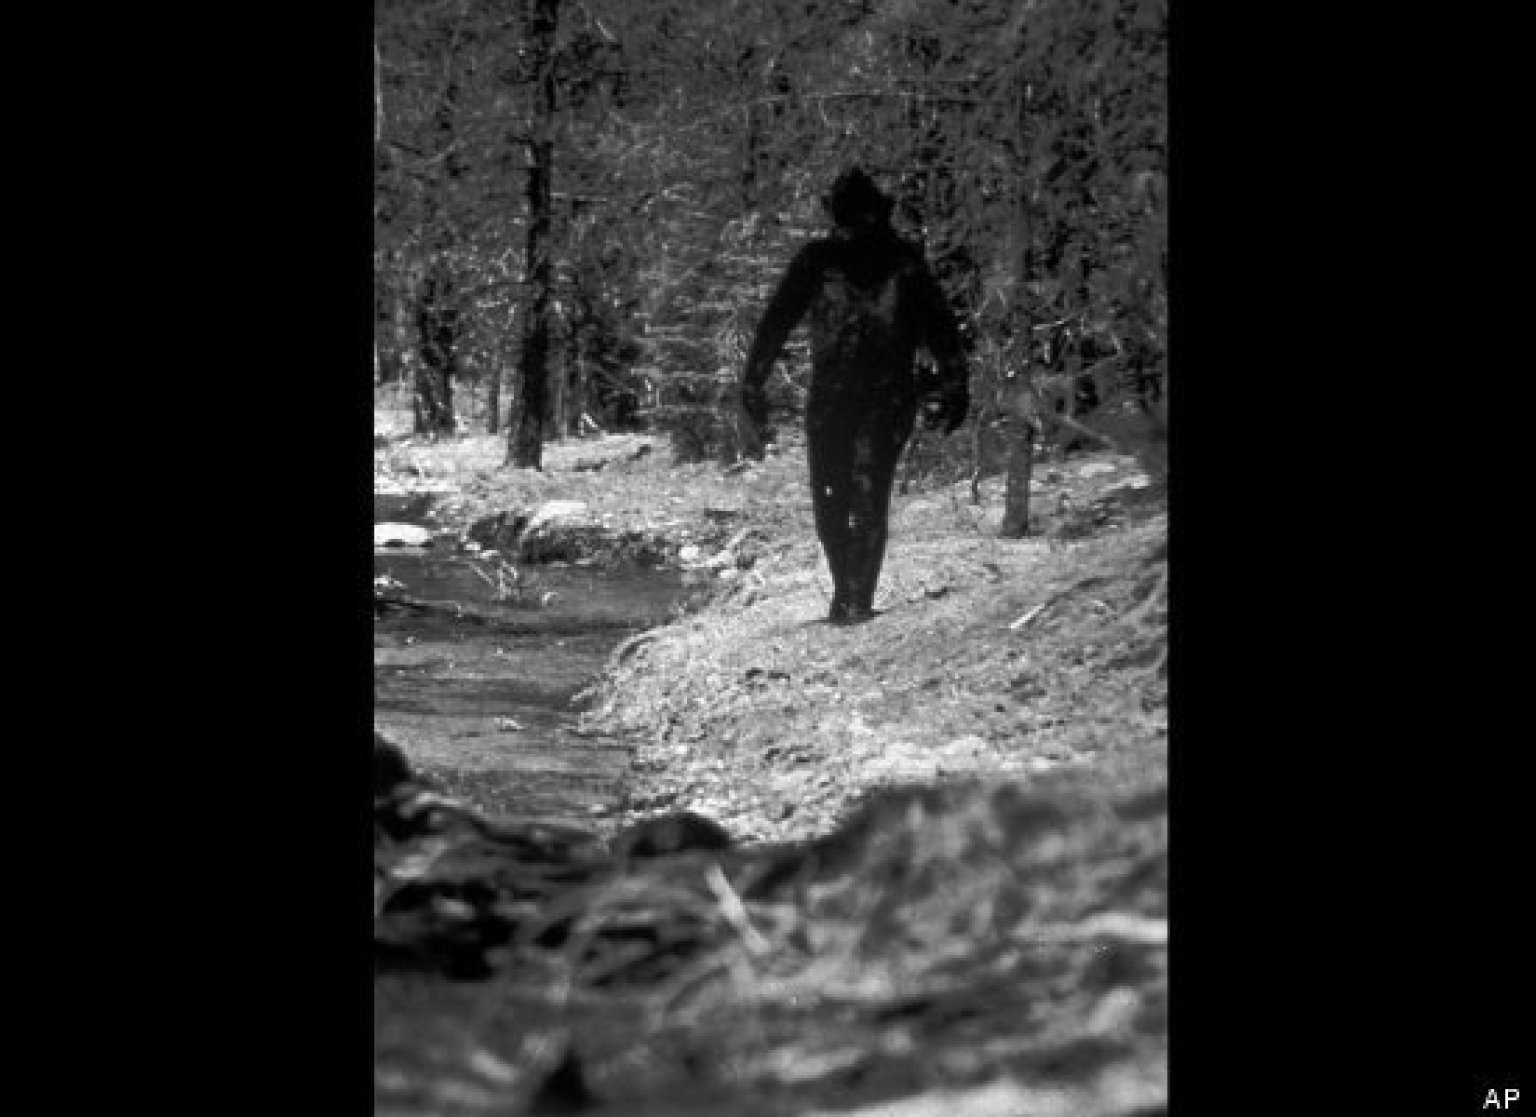 Bigfoot Dna Tests Melba Ketchums Research Results Are Bogus Claims Houston Chronicle Report 